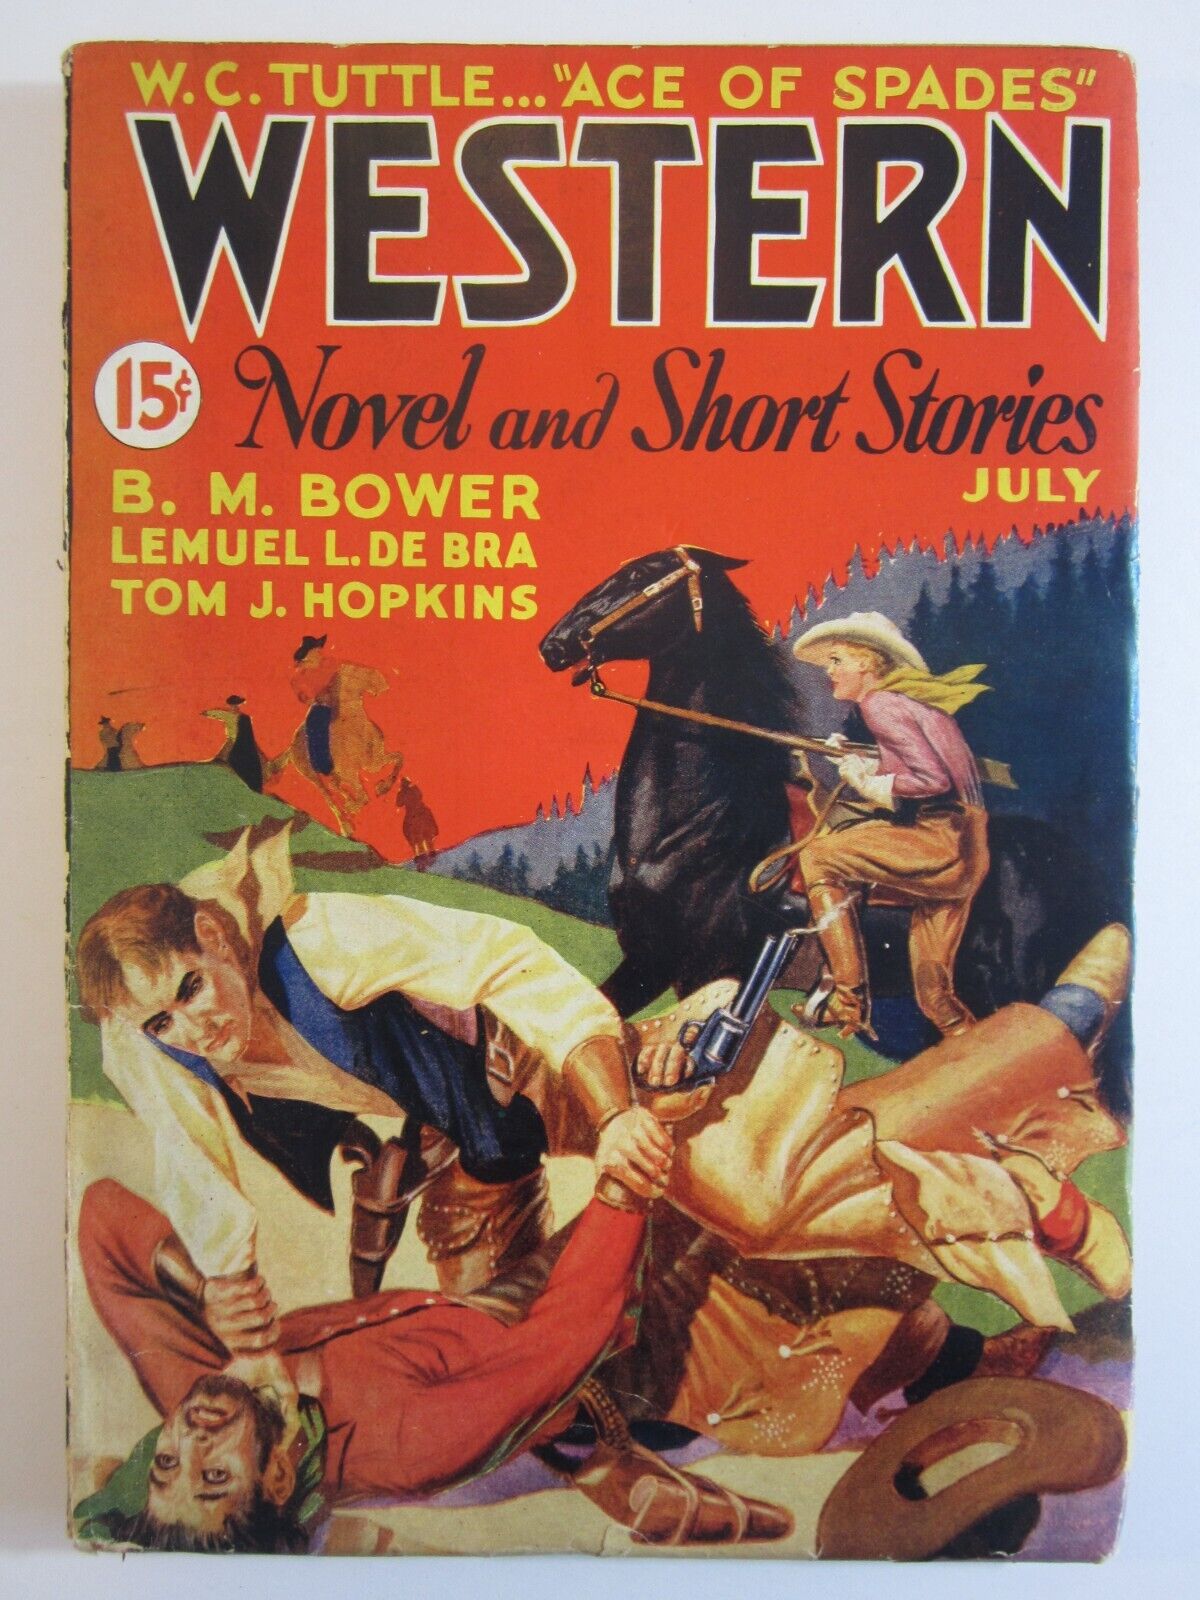 Western Novels and Short Stories Pulp Vol. 1 #4, July 1934 GD